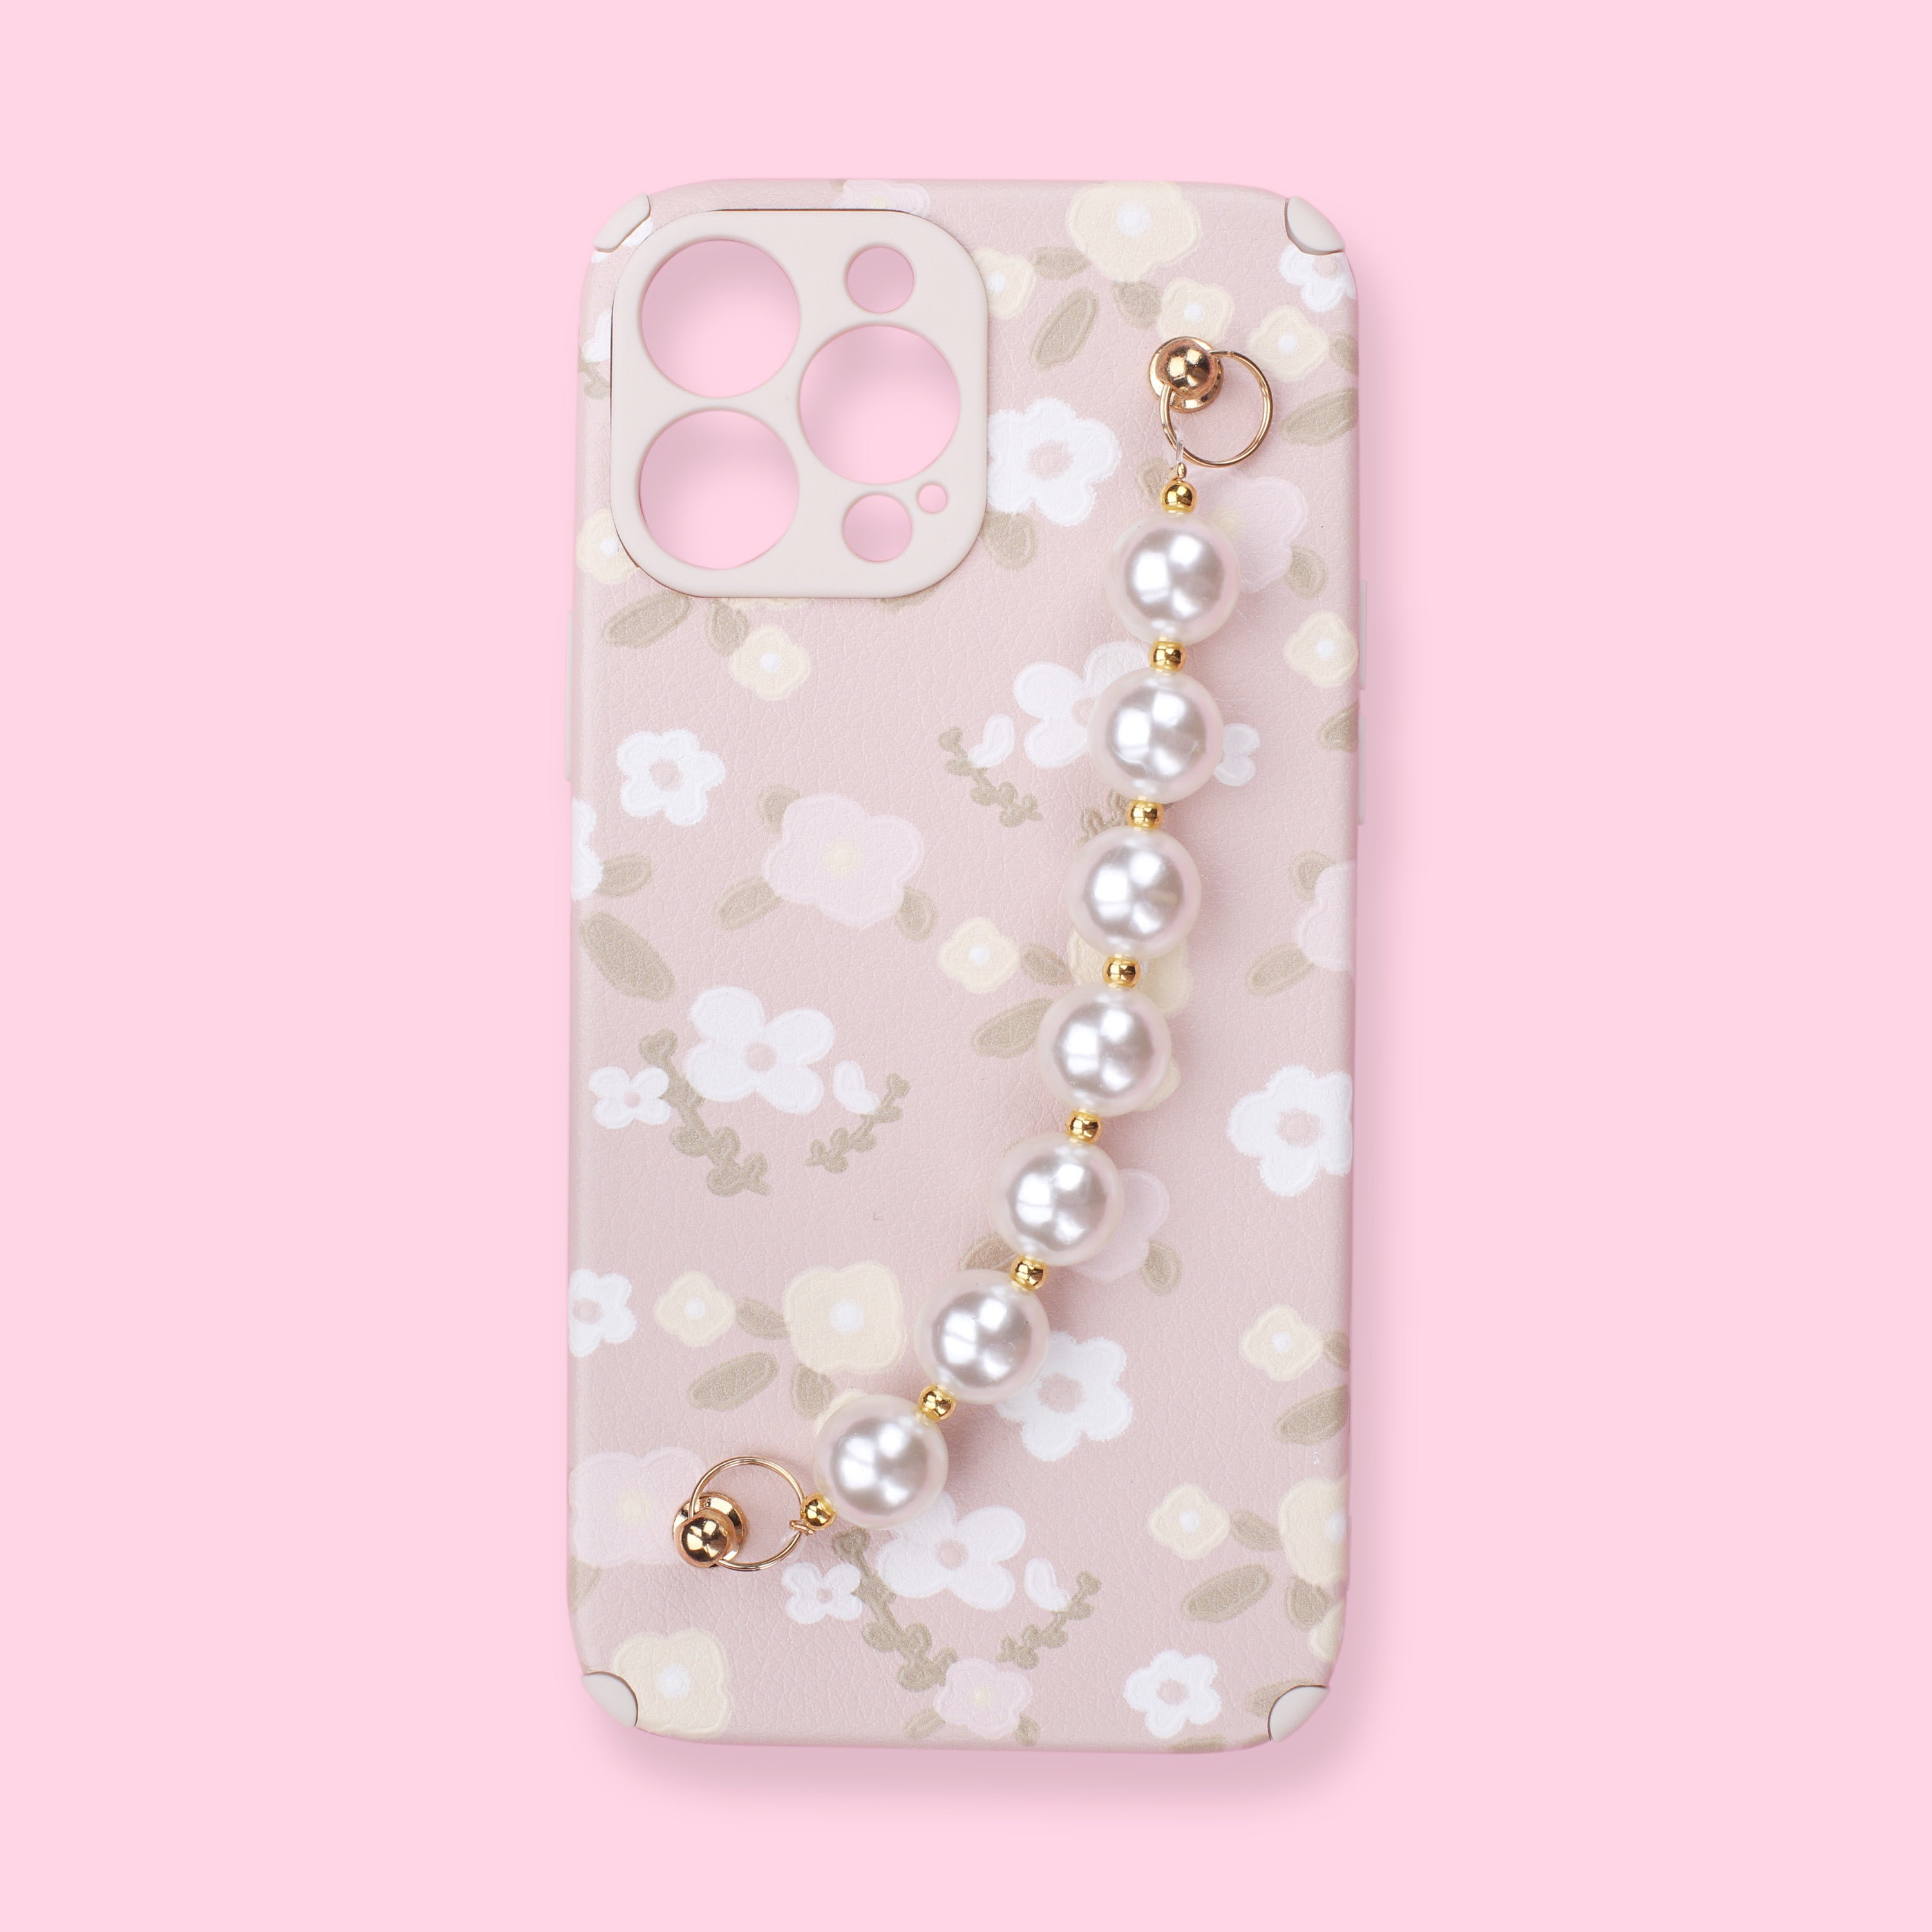 iPhone 13 Pro Max Case - Oil Painting Floral - Stationery Pal